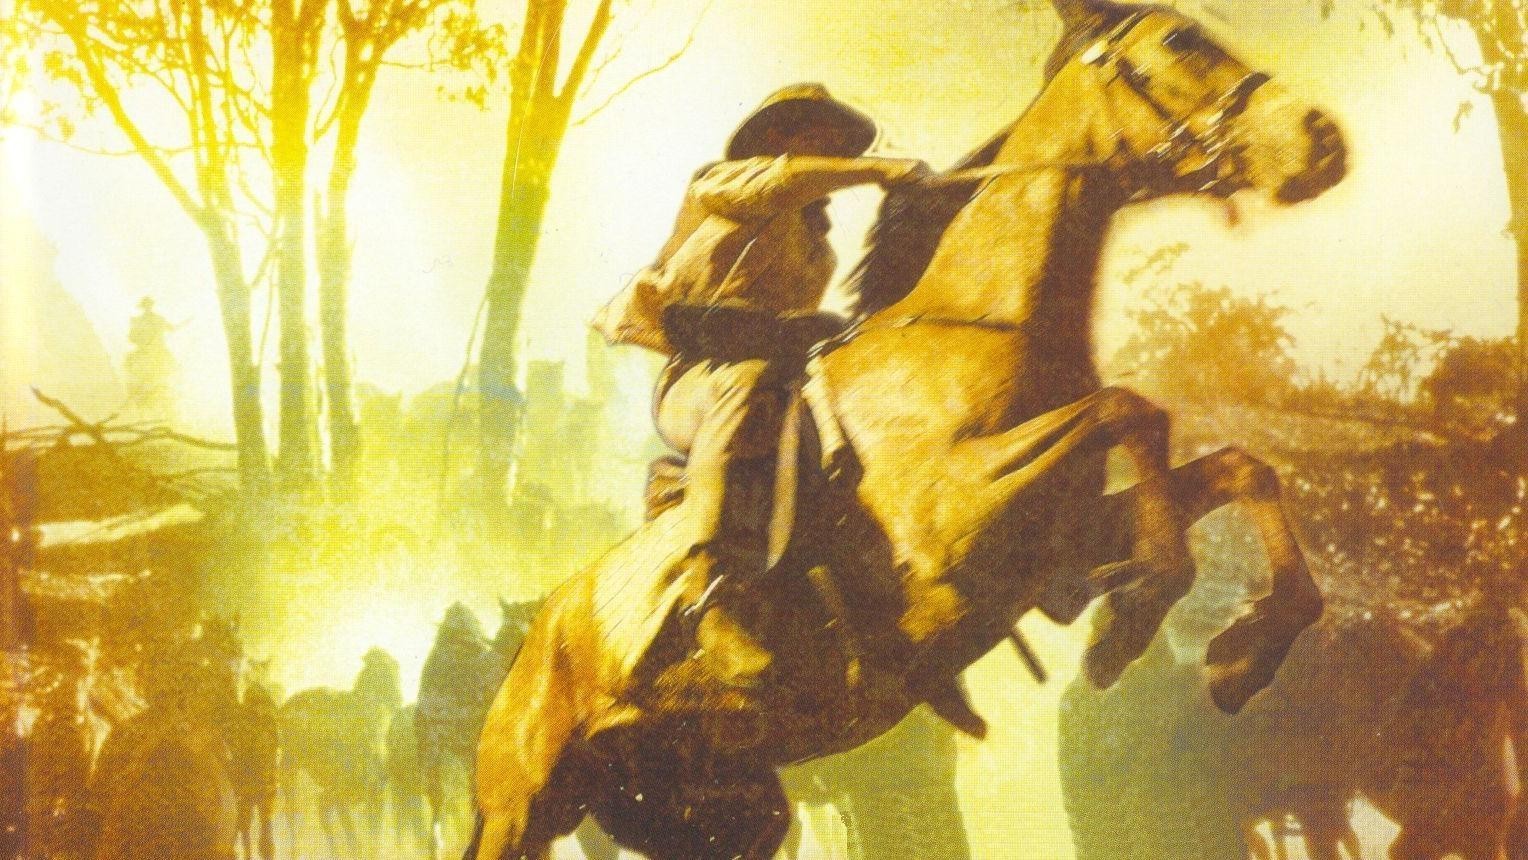 The Man from Snowy River II